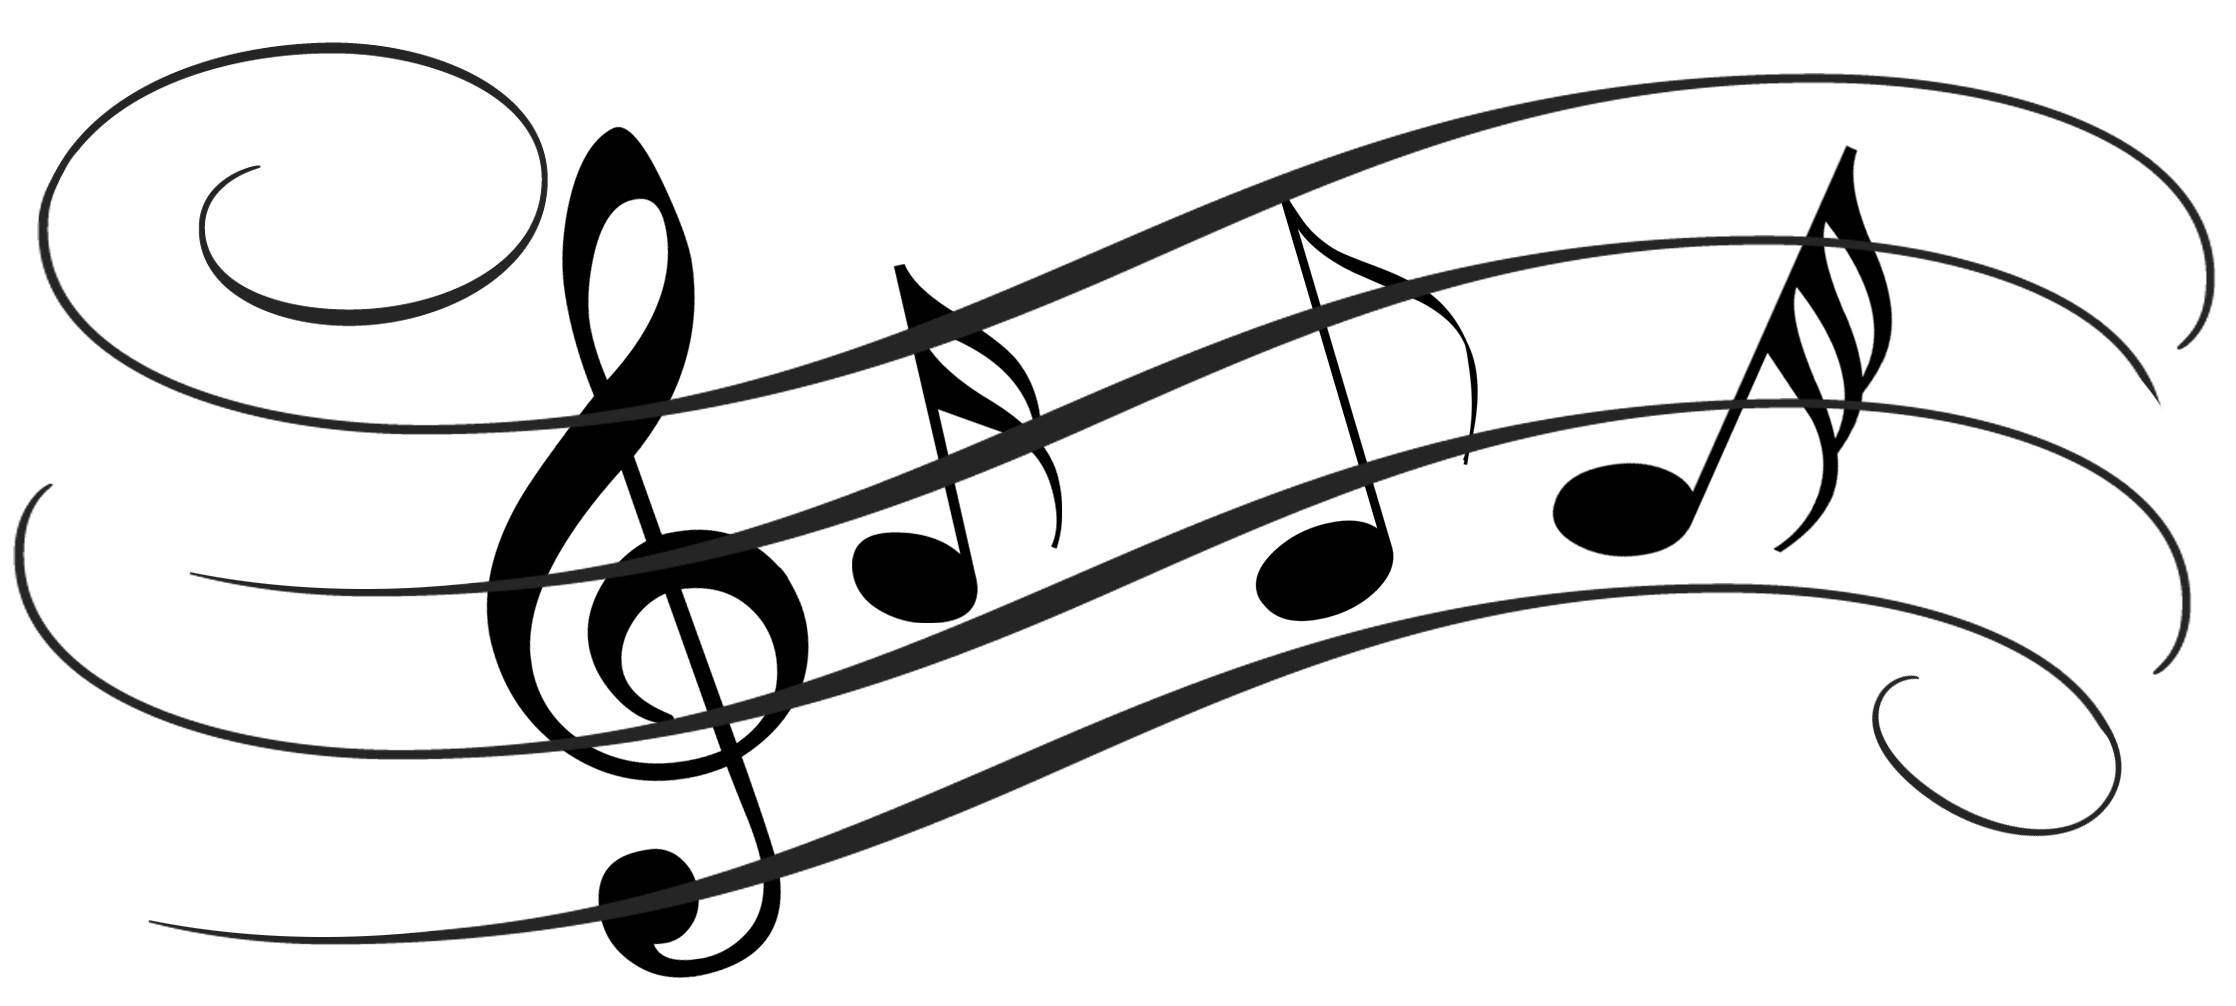 Music Note Drawings - ClipArt Best